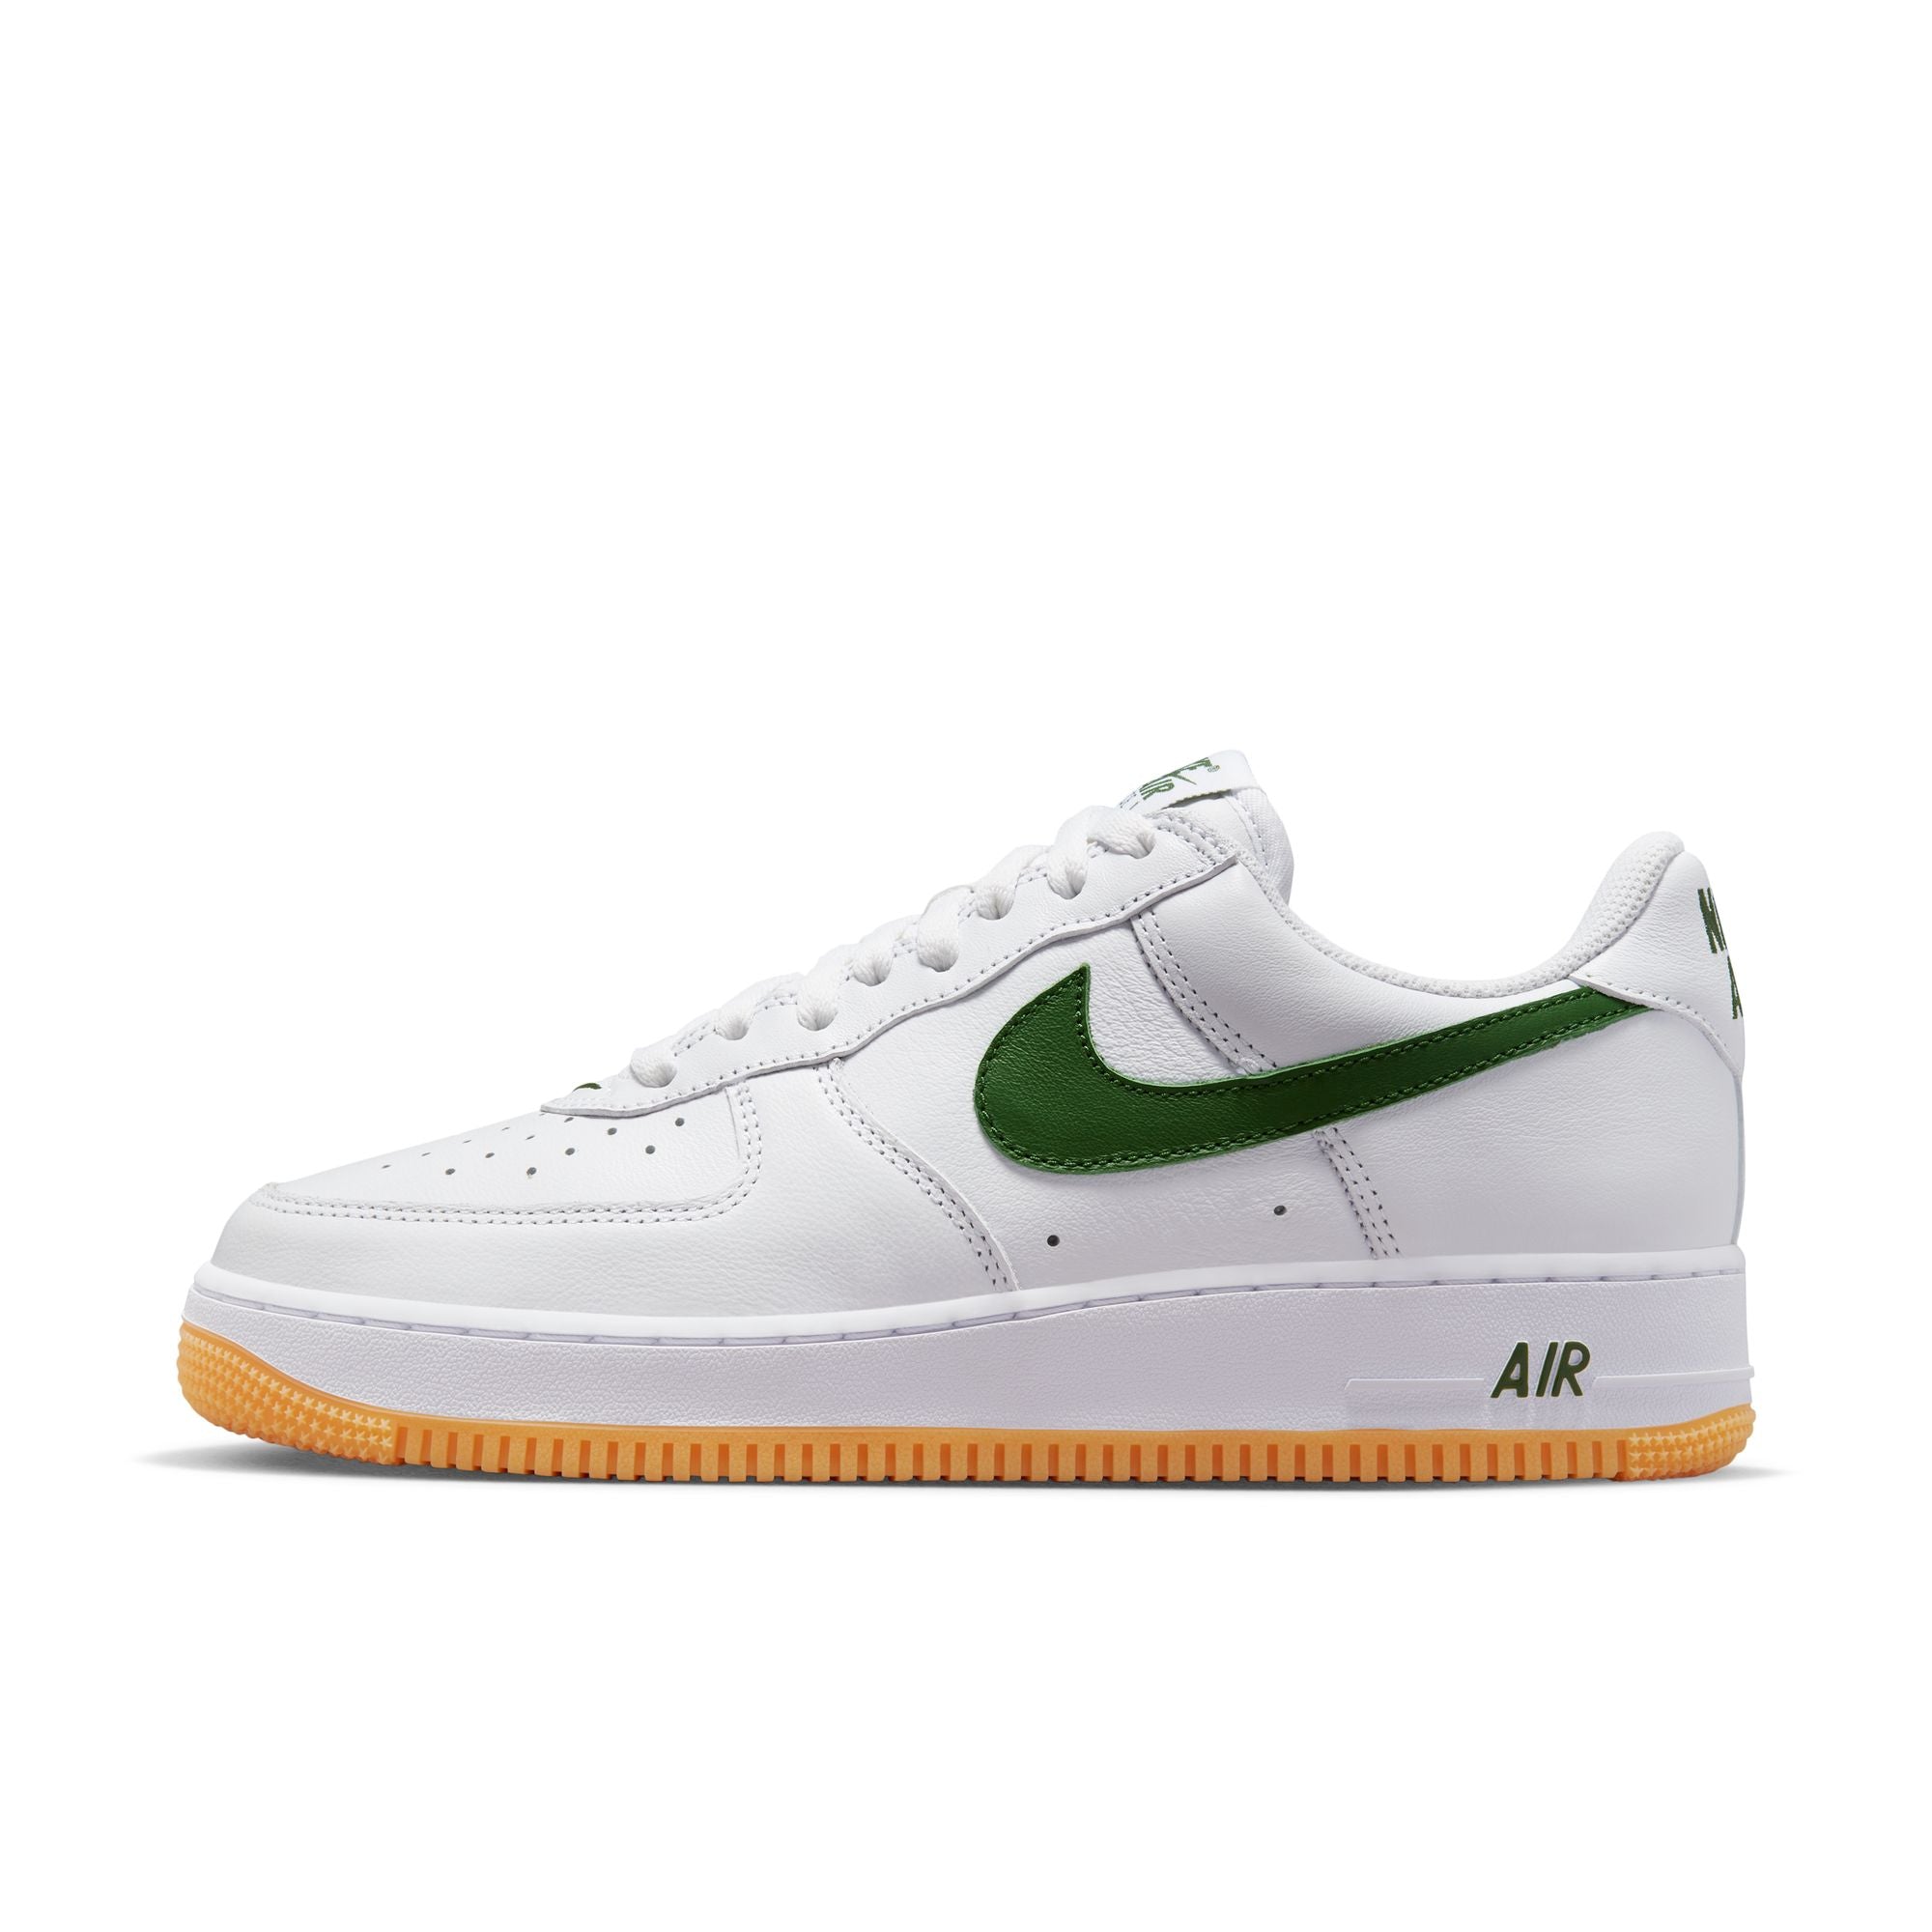 NIKE - Air Force 1 Low Retro Qs - (White/Forest Green-Gum Yellow)